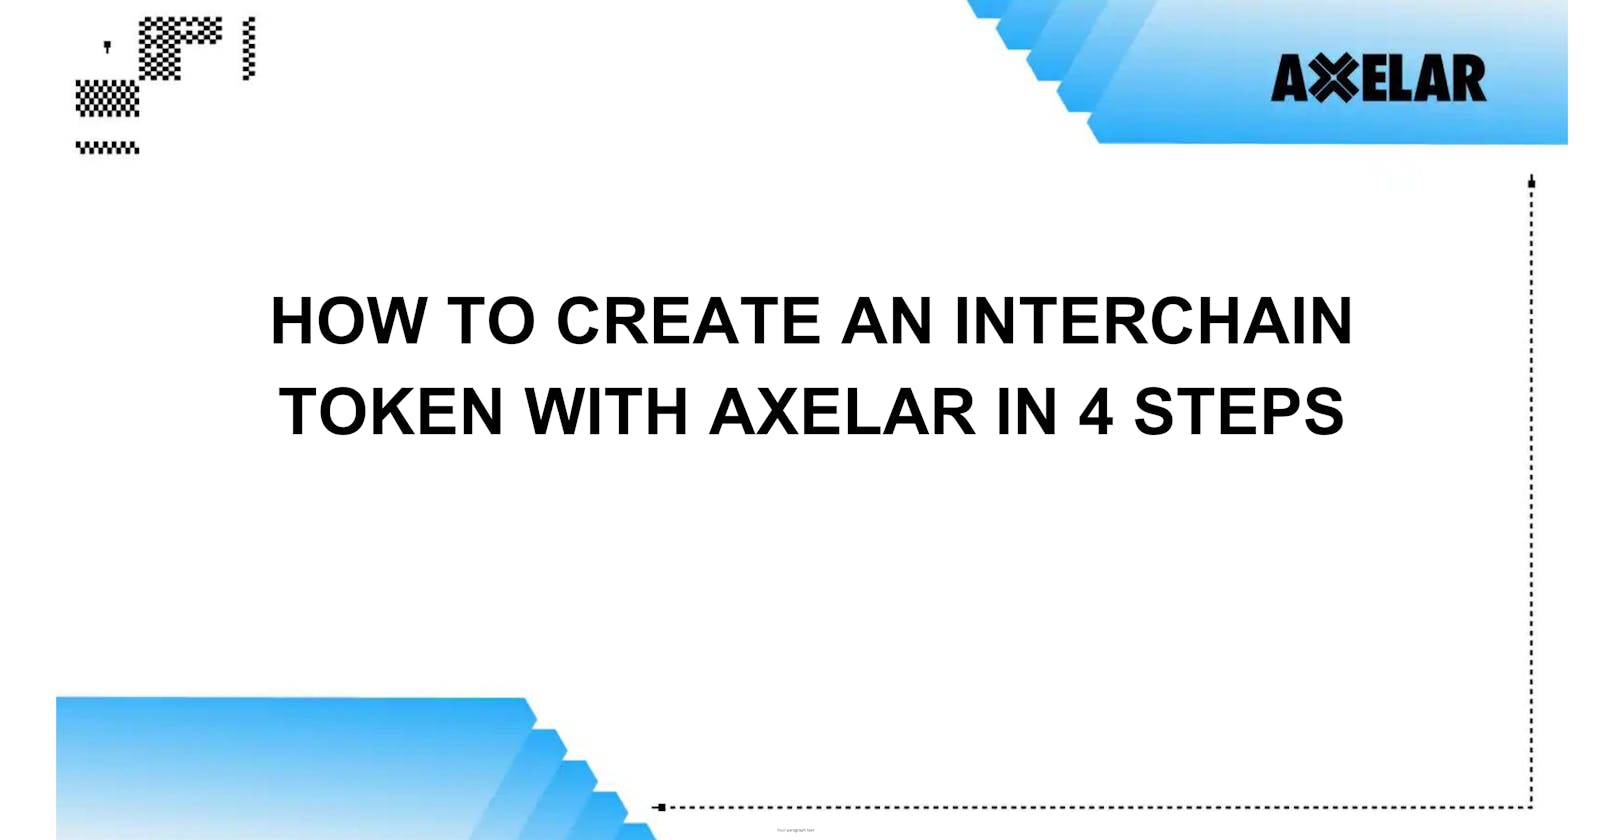 How to Create an Interchain Token with Axelar in 4 Steps